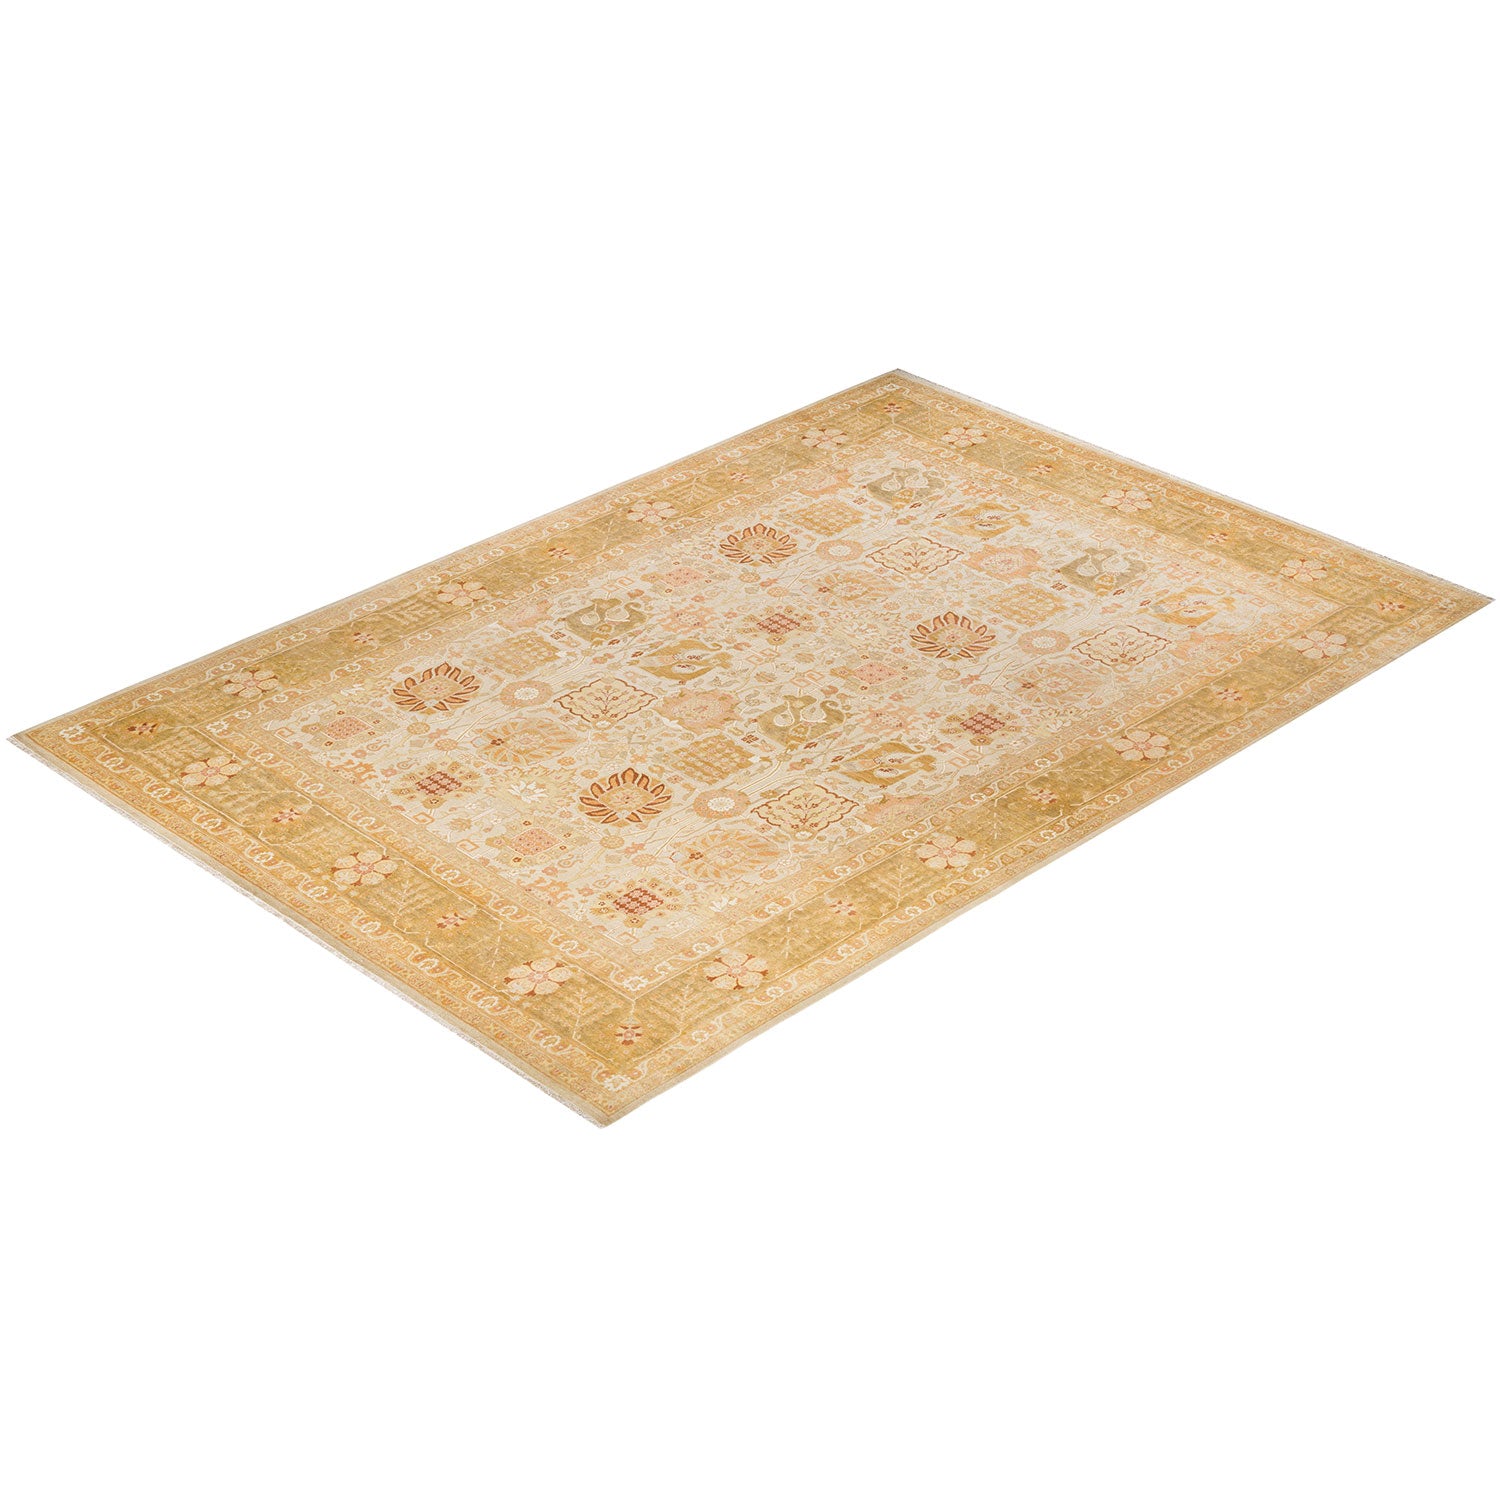 Rectangular area rug with intricate pattern in subdued colors.